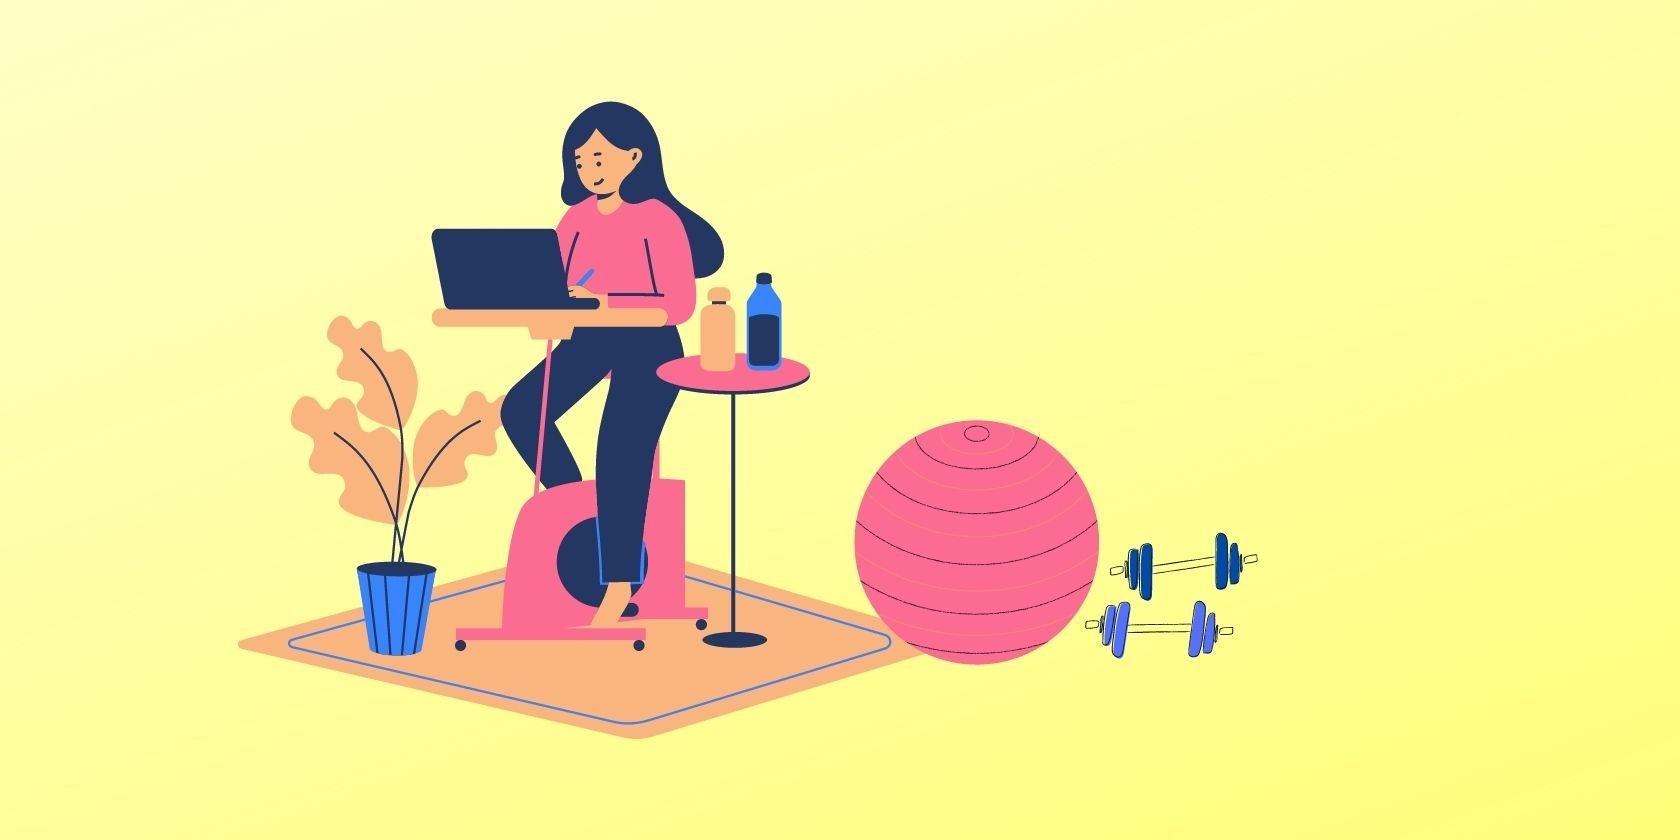 5 Creative Ways to Increase Physical Activity at Work